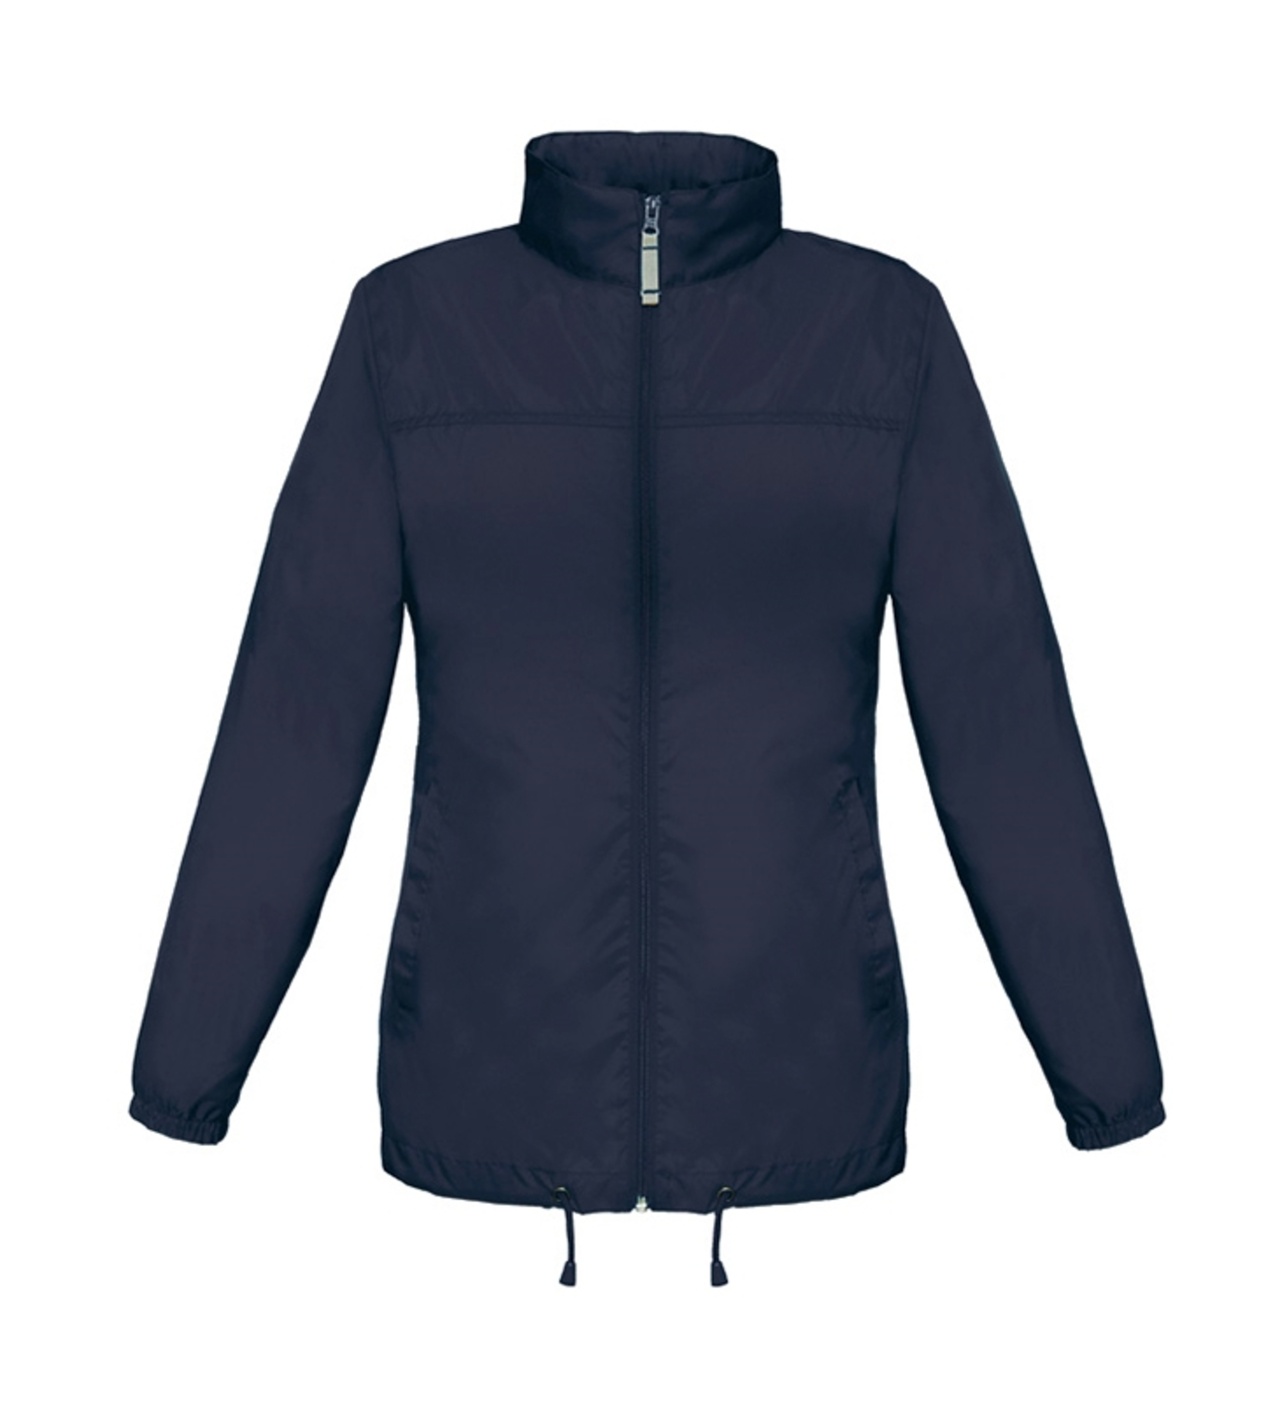 B and C Collection Sirocco Woman - Navy - XL